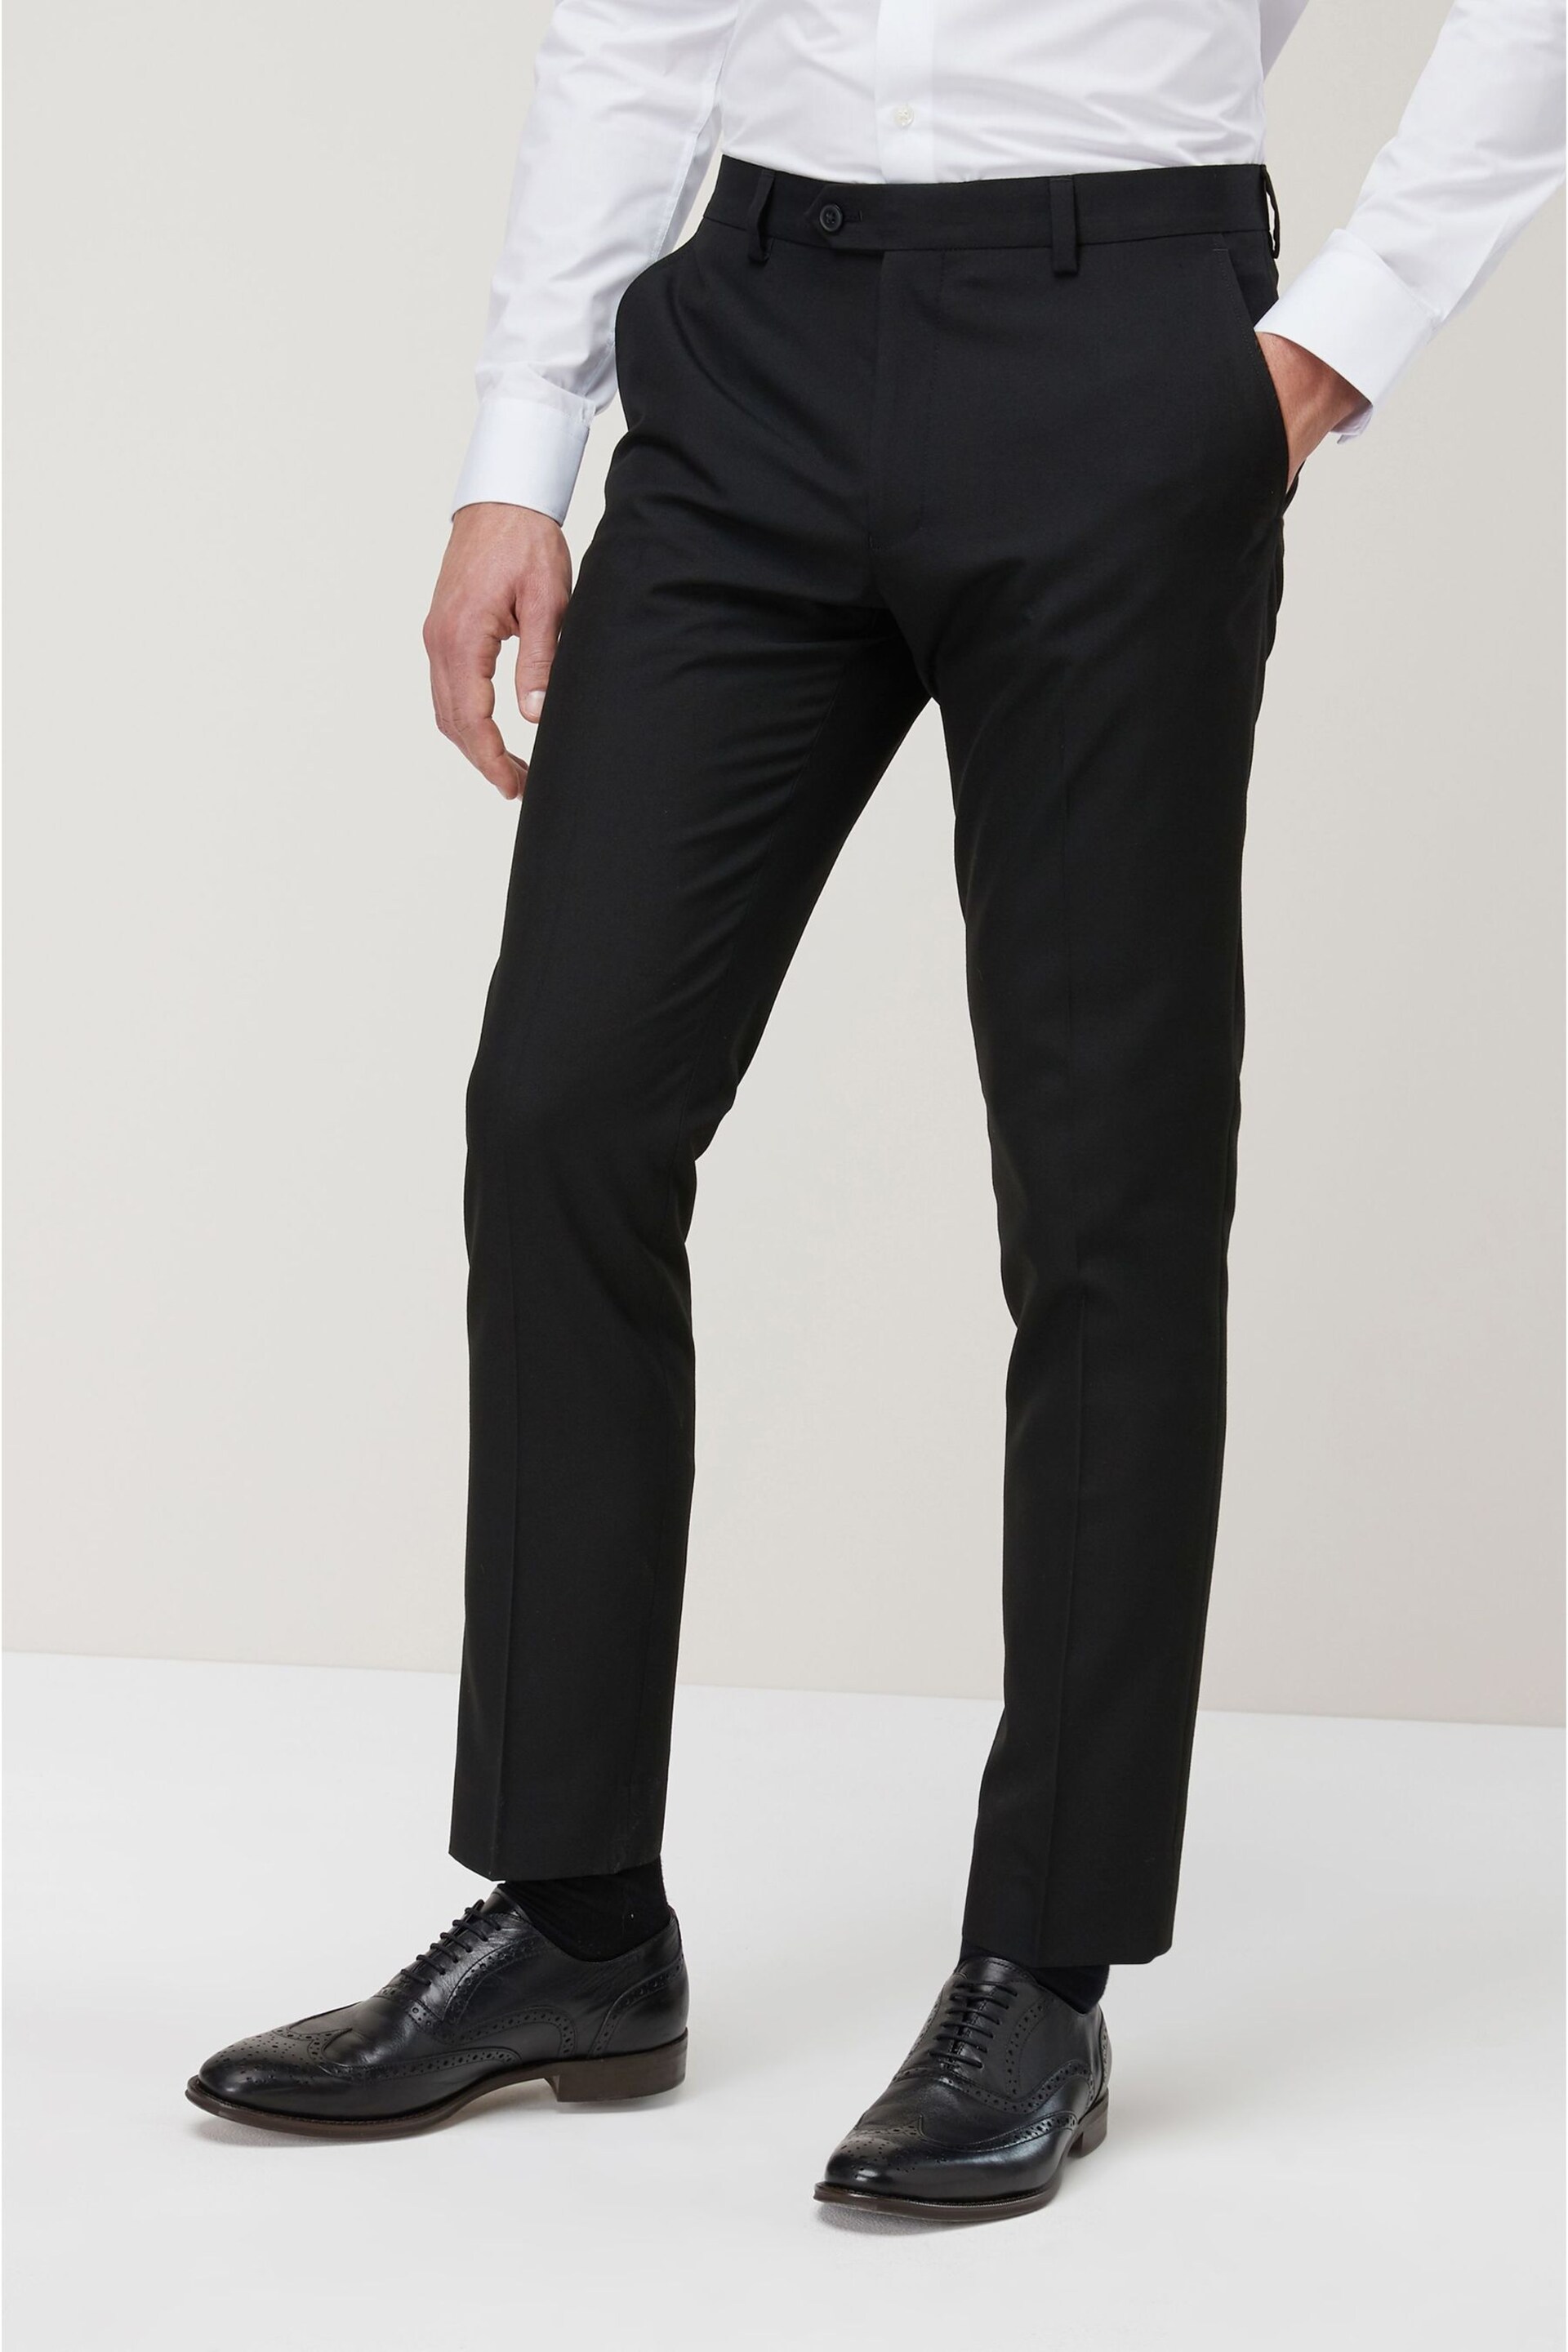 Black Skinny Suit Trousers - Image 2 of 8